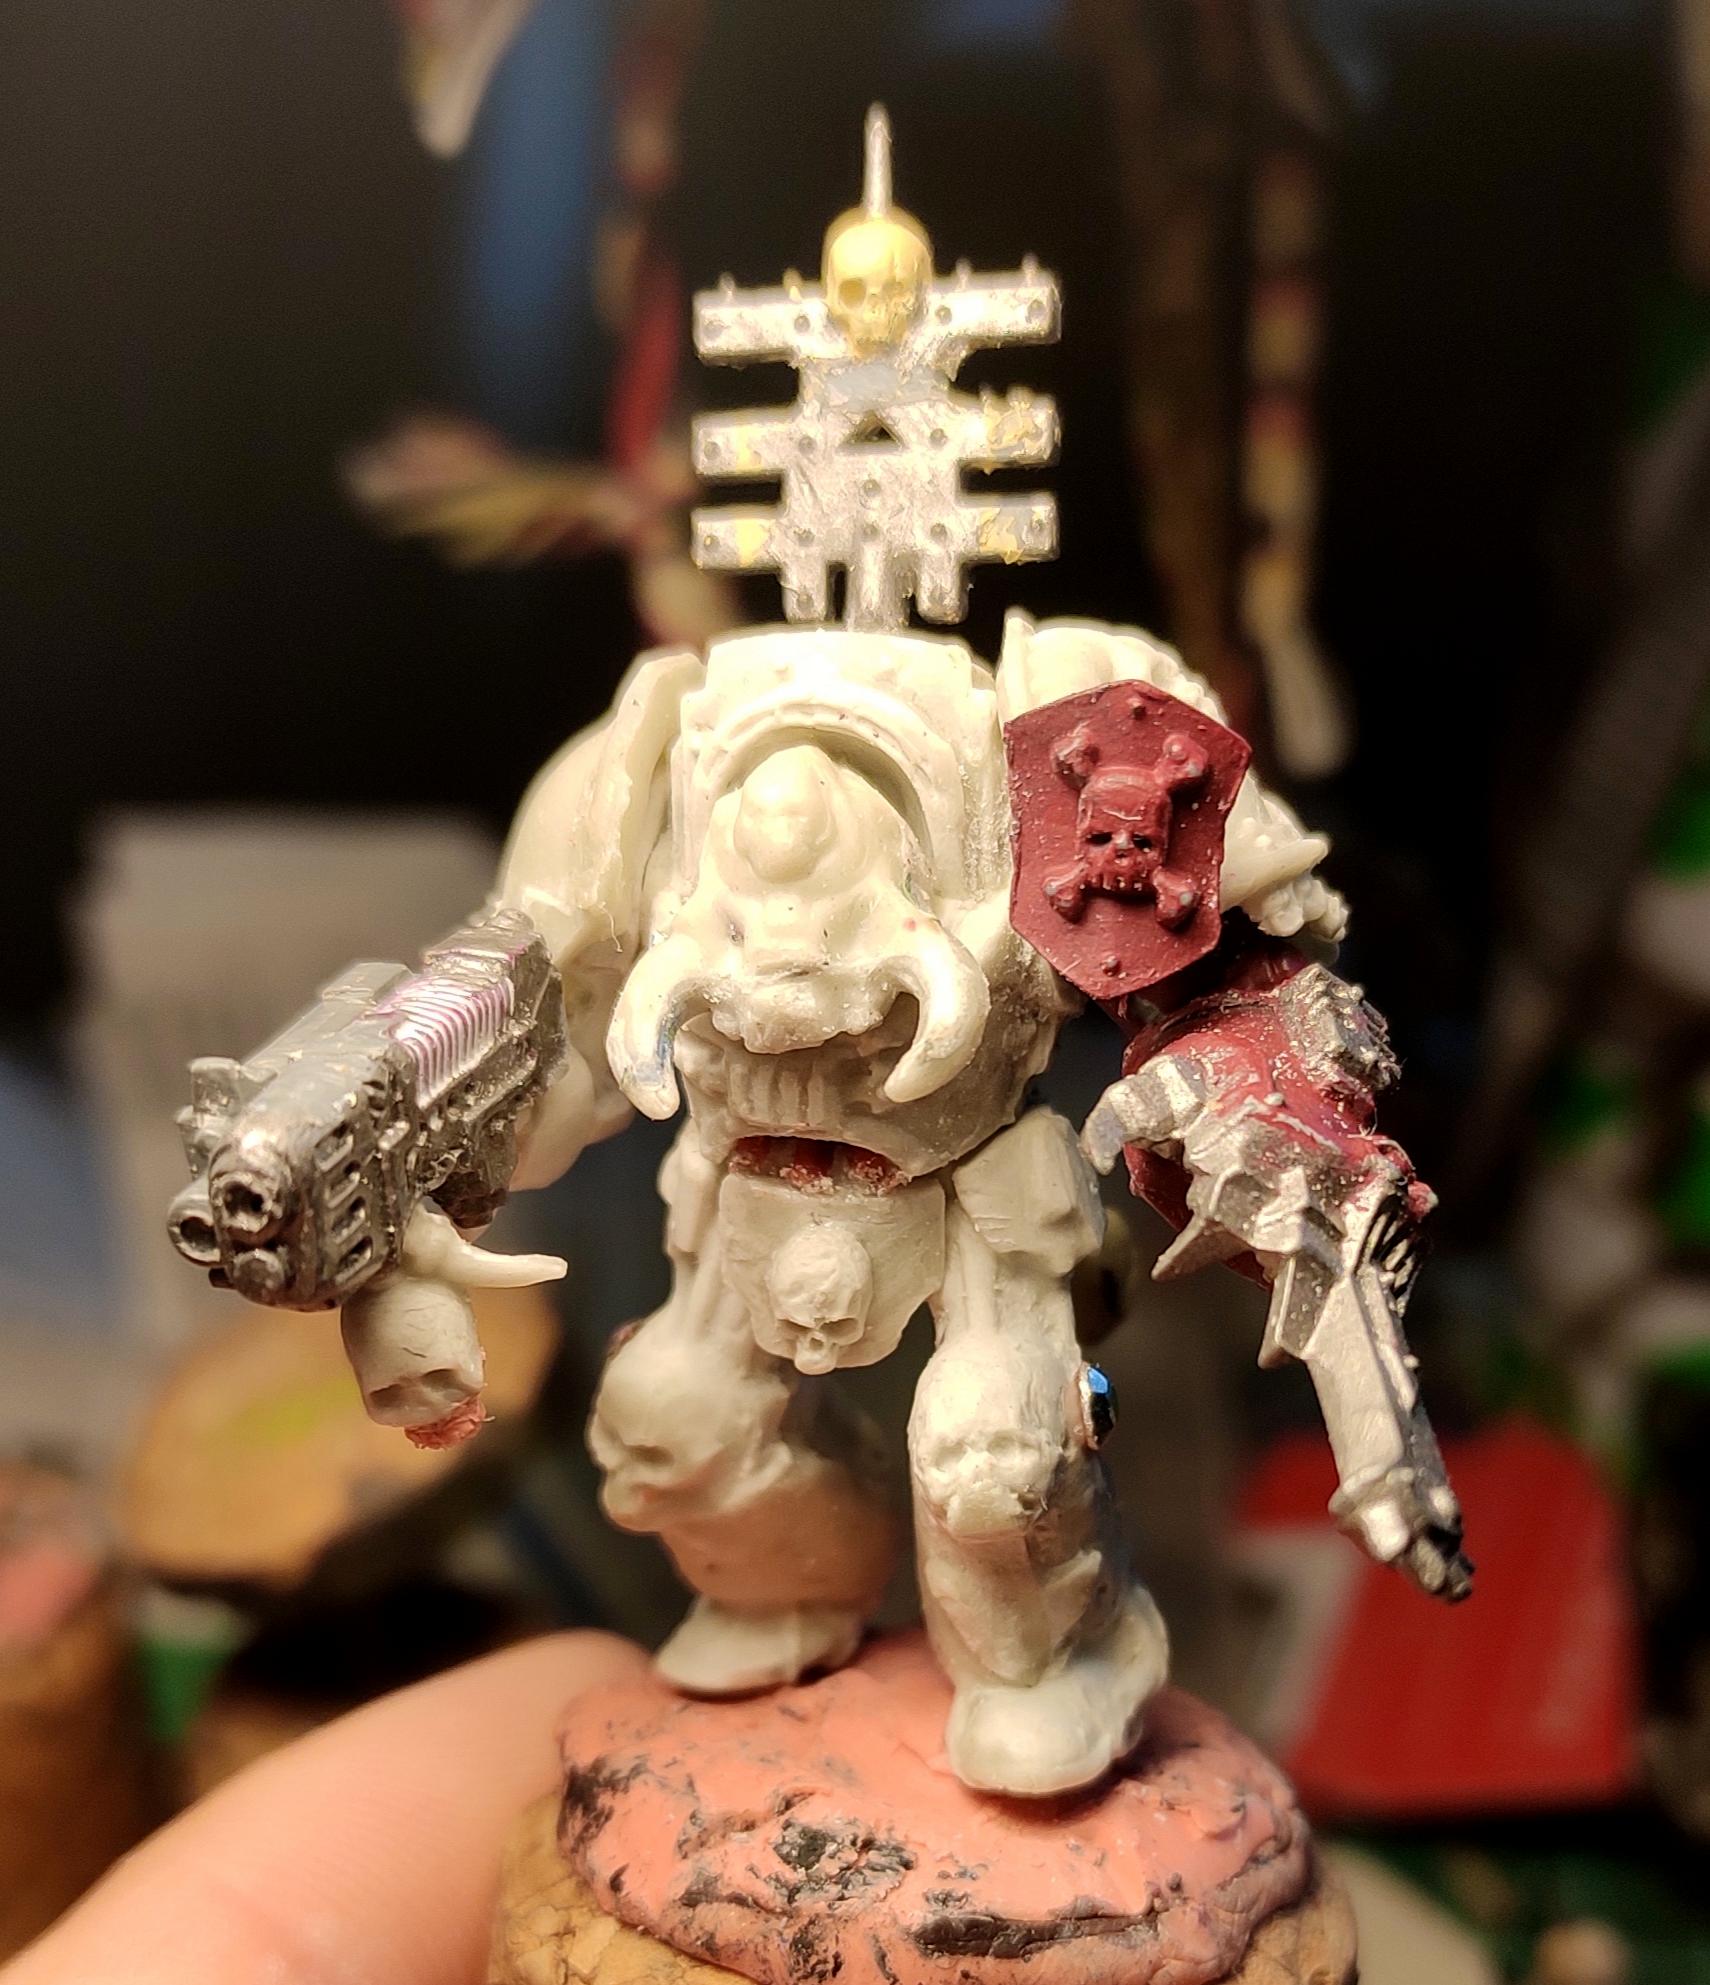 Casting, Chain Fist, Chaos, Chaos Space Marines, Combiweapon, Conversion, Heresy, Heretic Astartes, Infantry, Kitbash, Putty, Terminator Armor, Traitor Legions, Warhammer 40,000, Work In Progress